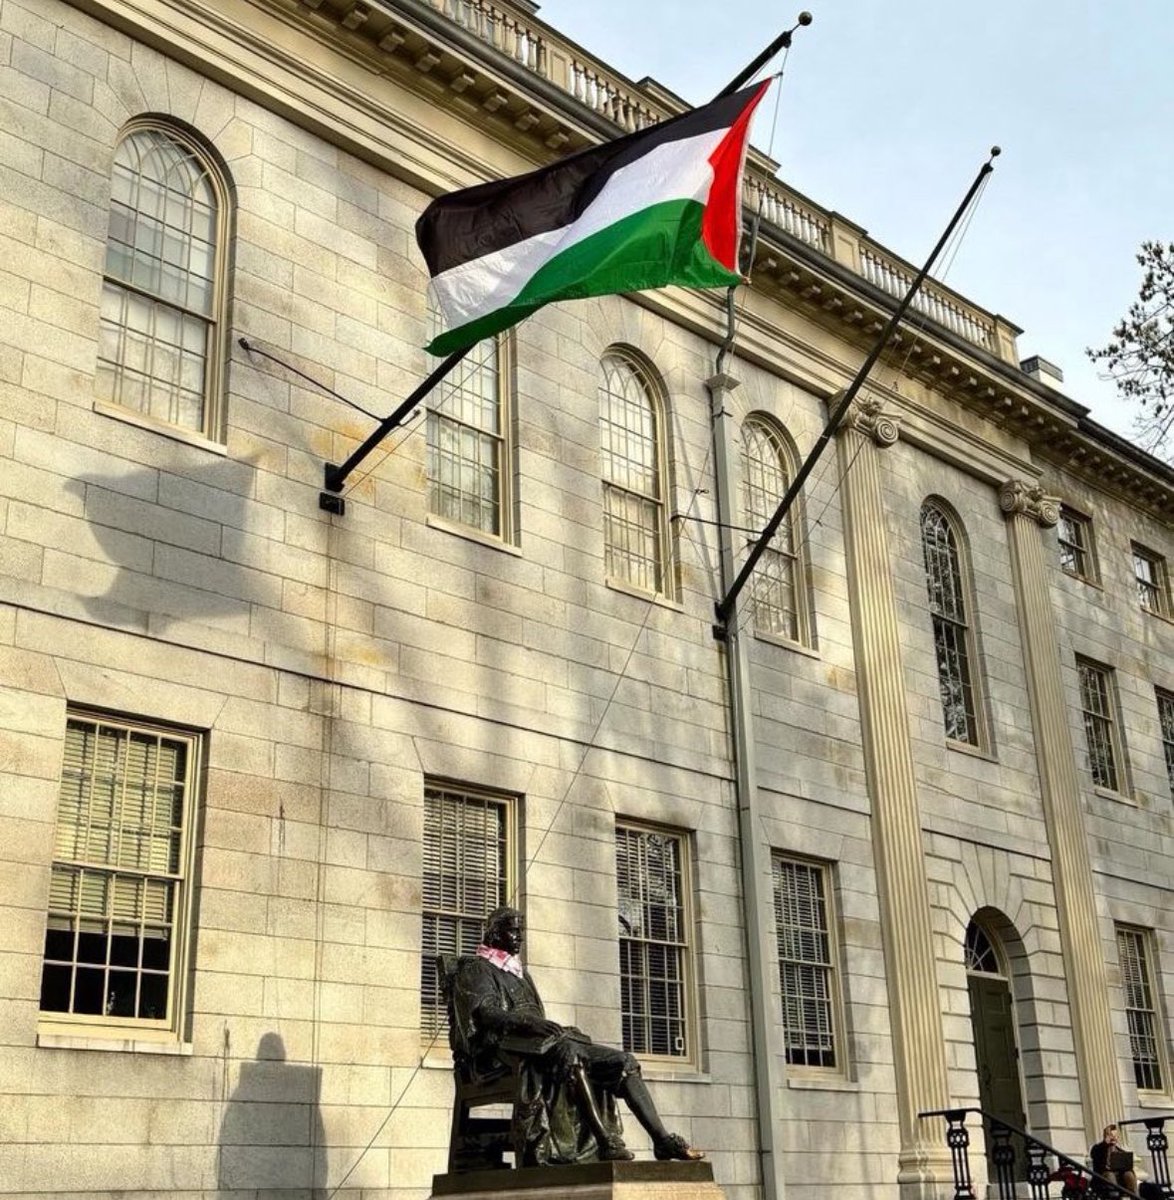 Harvard Universities American flag was removed and replaced with a Palestinian flag.